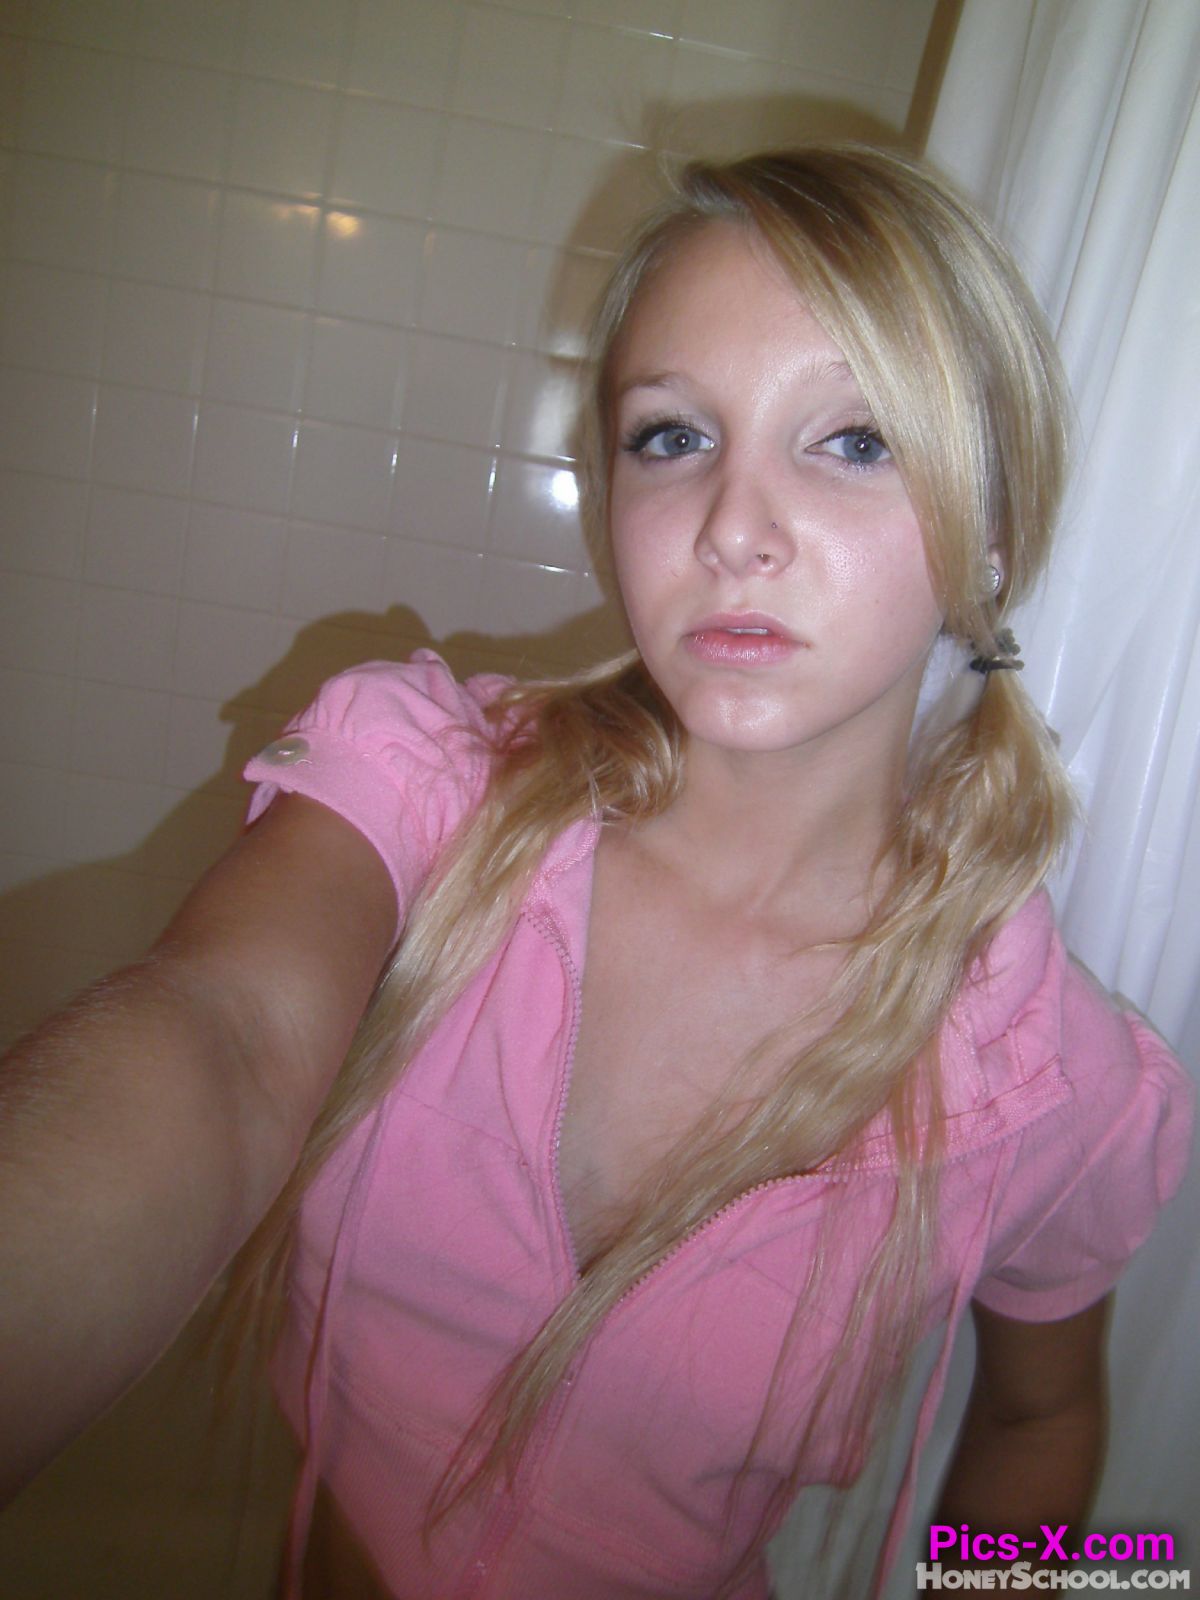 Issy In The Bathroom - Image 1